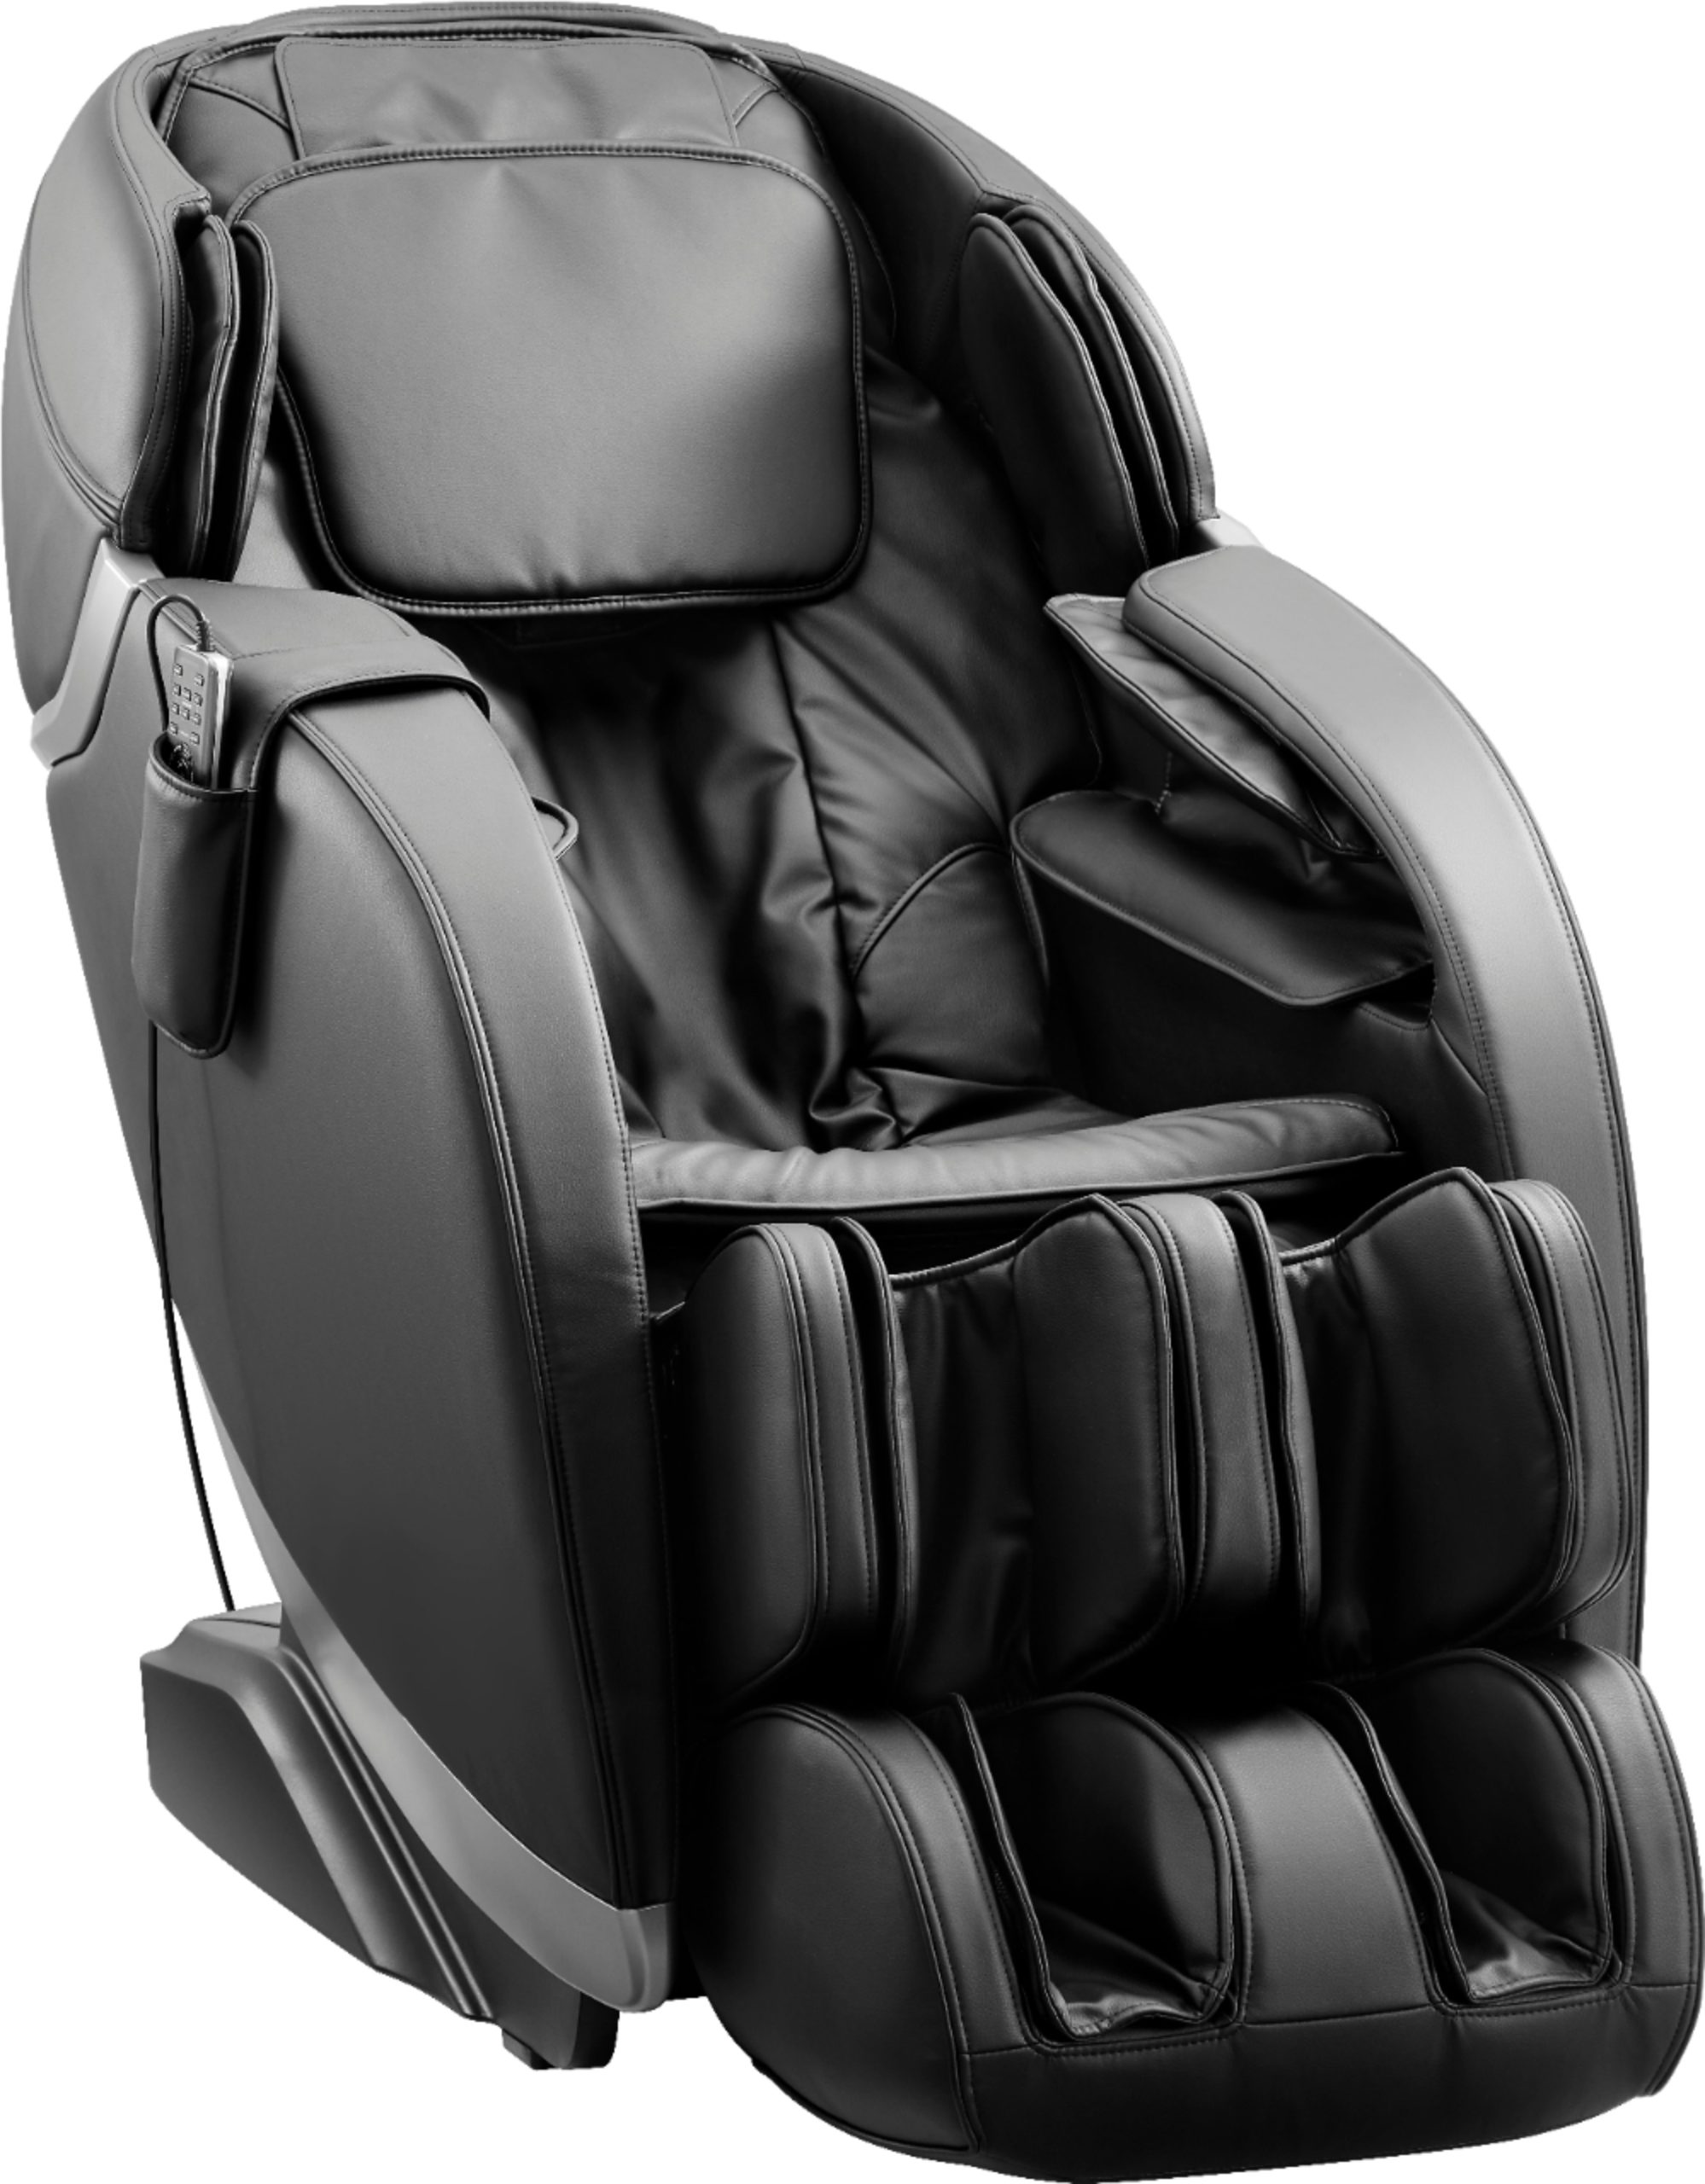 Insignia™ – 2D Zero Gravity Full Body Massage Chair – Black with silver trim – Just $1249.99 at Best Buy